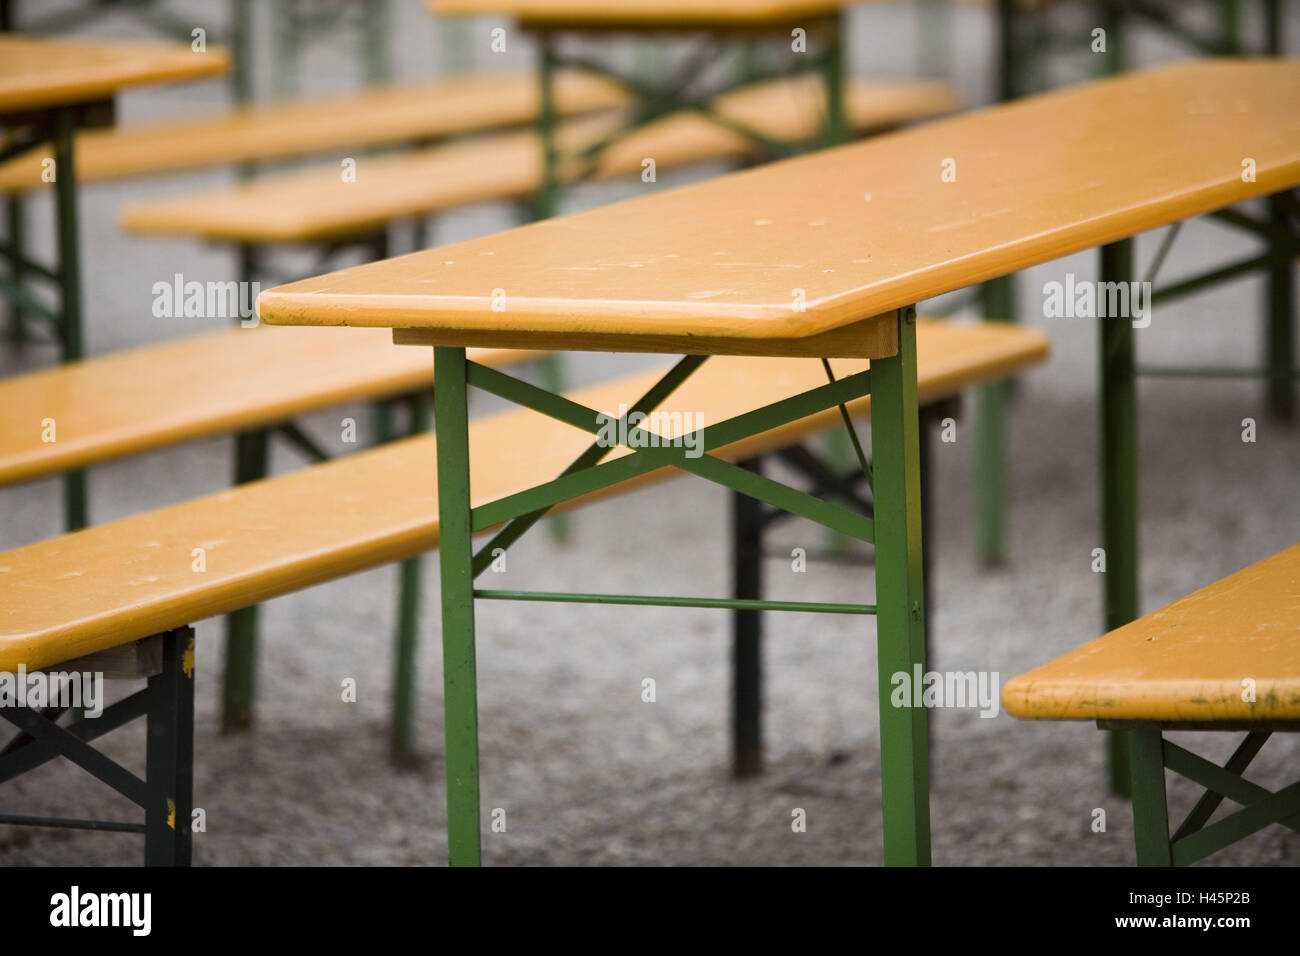 Beer Garden Tables Benches Empty Stock Photo 123058275 Alamy